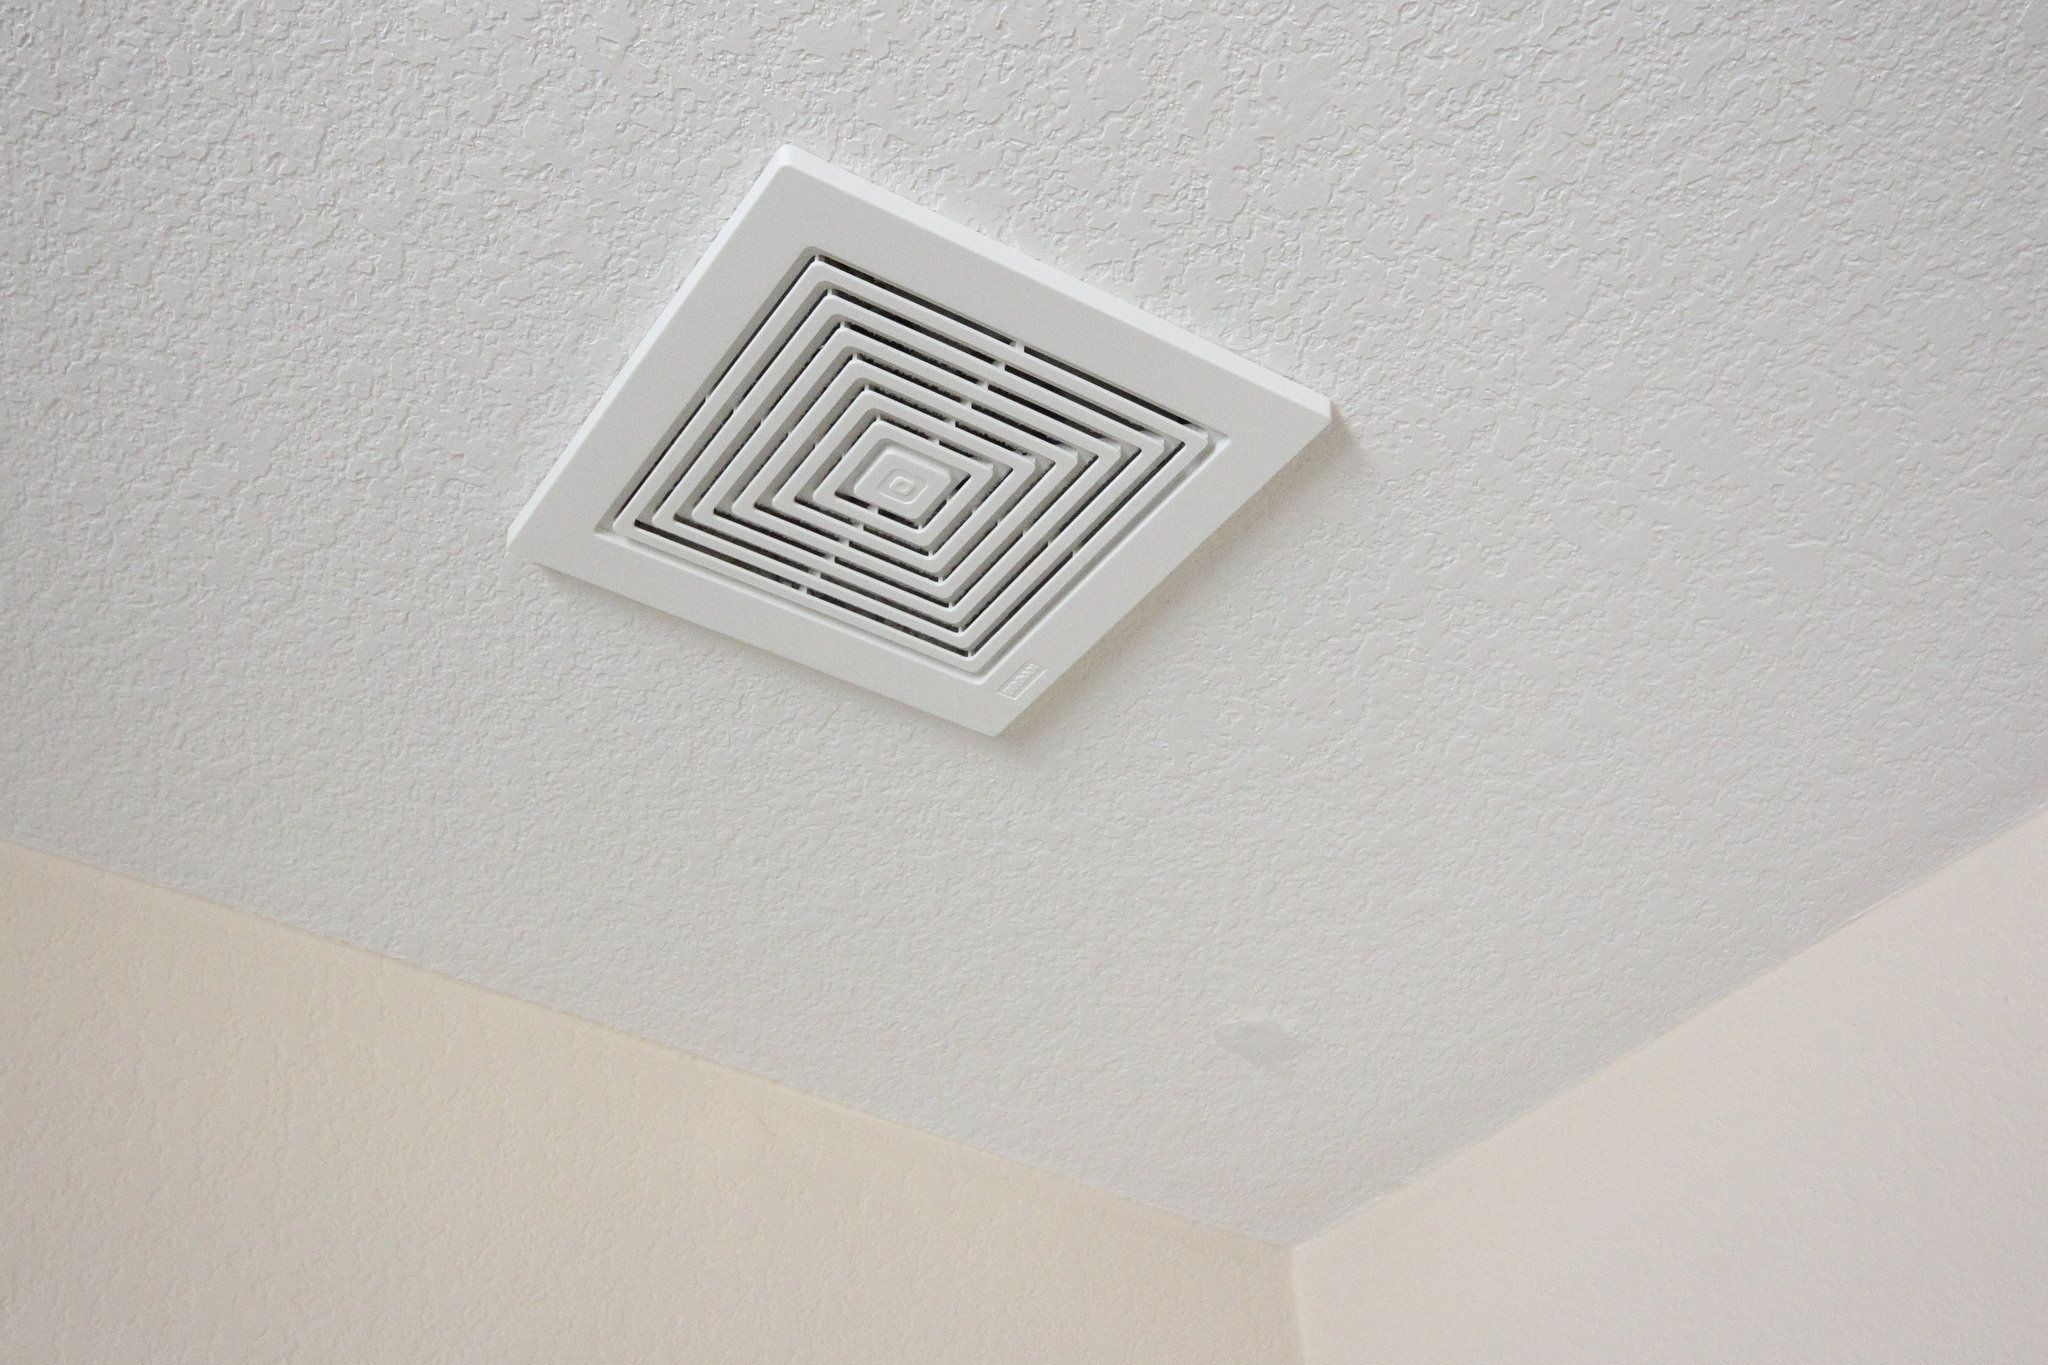 Exhaust Fan For Bathroom
 How to Install a Bathroom Exhaust Fan